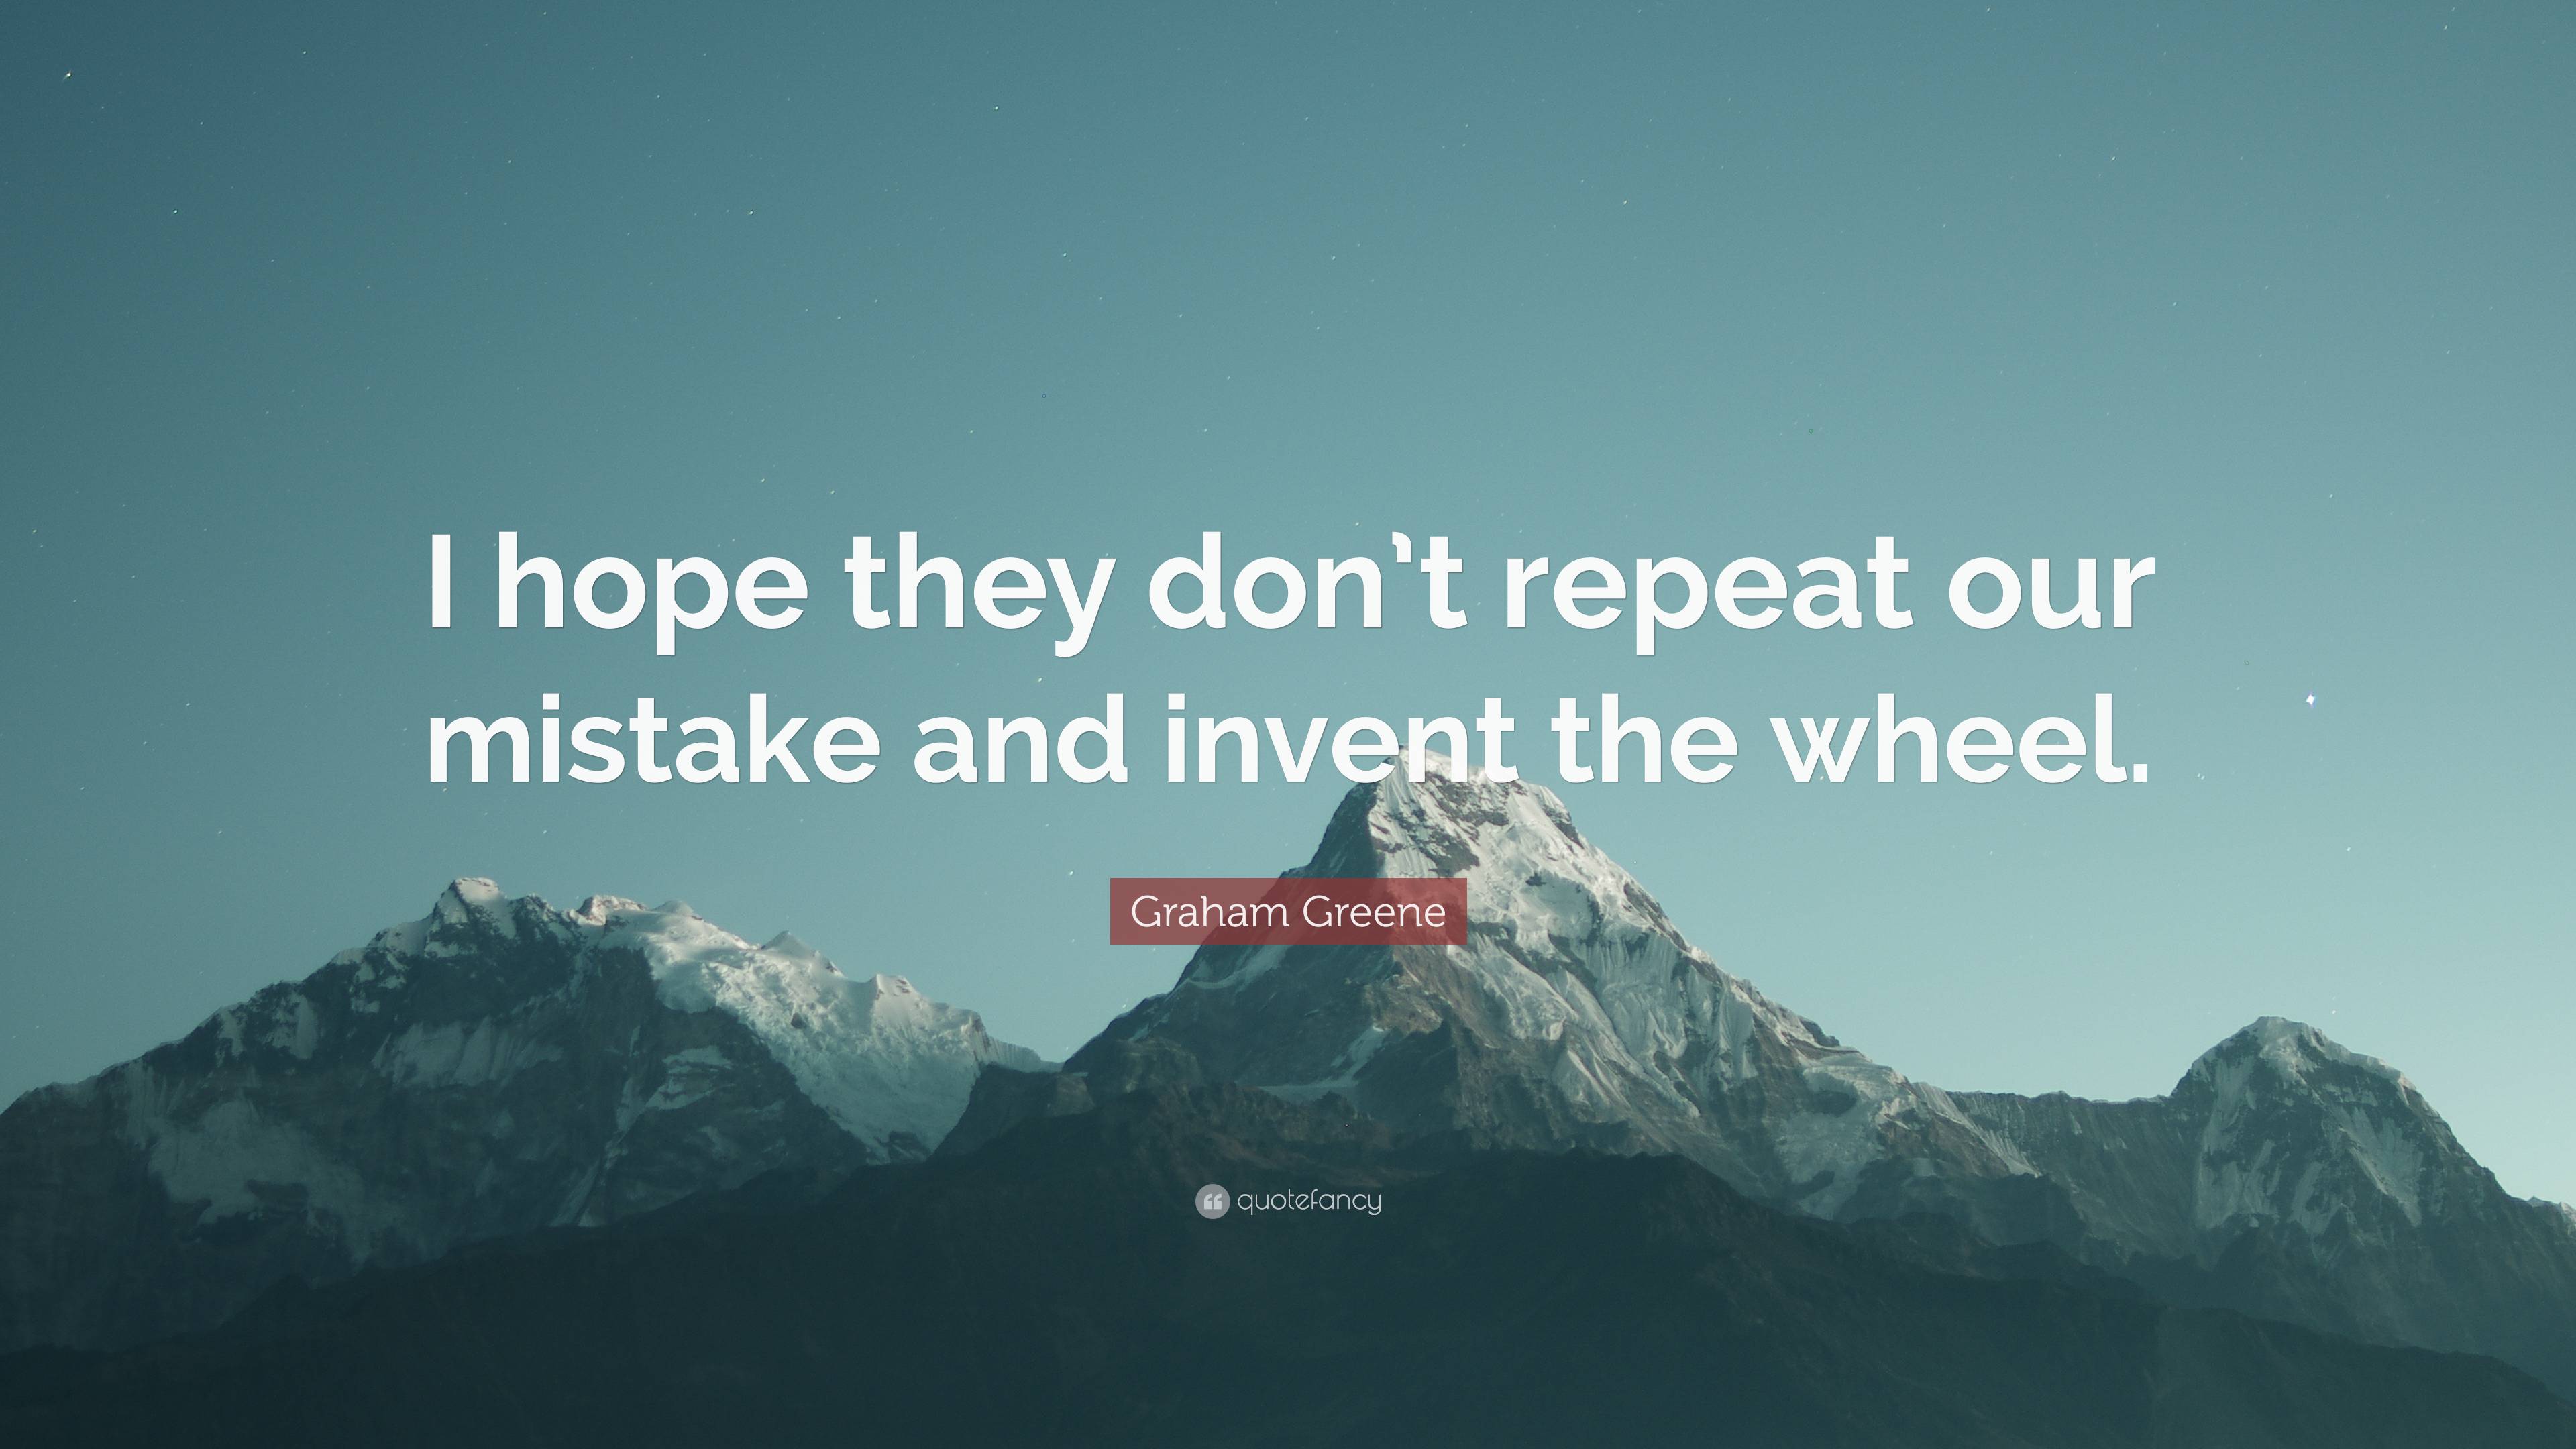 Graham Greene Quote: “I hope they don’t repeat our mistake and invent ...